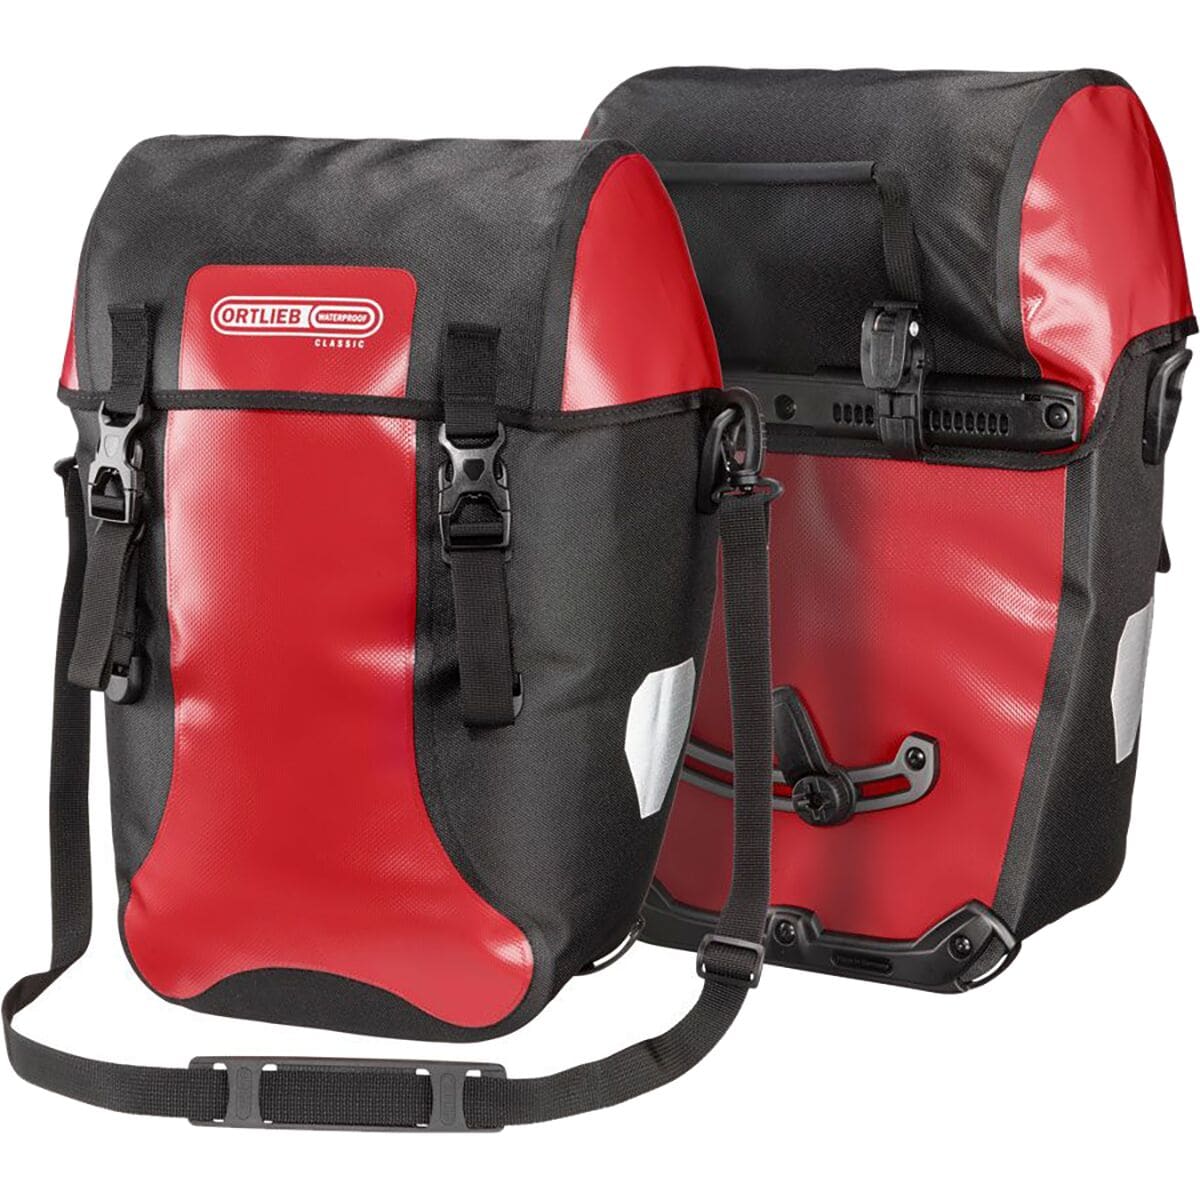 Ortlieb Bike-Packer Classic Panniers - Pair Red/Black, One Size